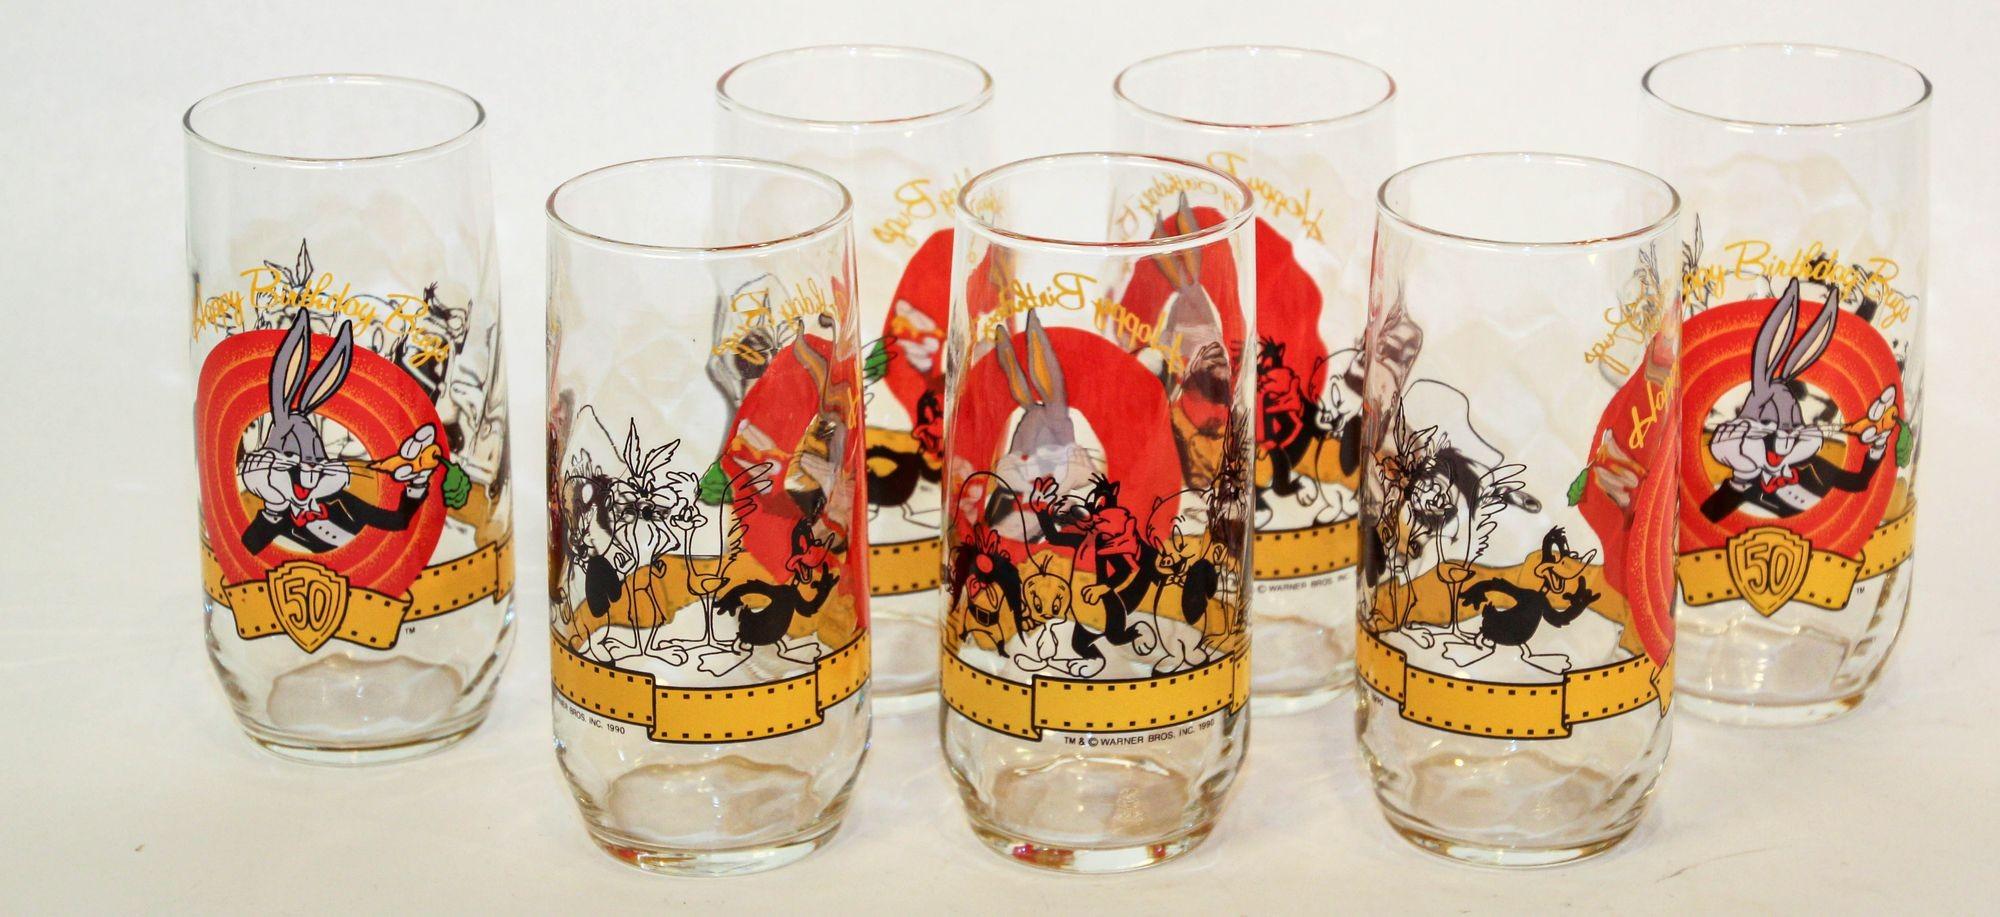 1990s Bugs Bunny Happy 50th Birthday Collectible Glasses Warner Bros.
Warner Bros. Happy Birthday Bugs Looney Tunes 50th Anniversary Set of 7 Drinking Glasses.
Looney Tunes Drink ware 1990 Warner Brothers, Include Bugs on front, Daffy, Tweety,